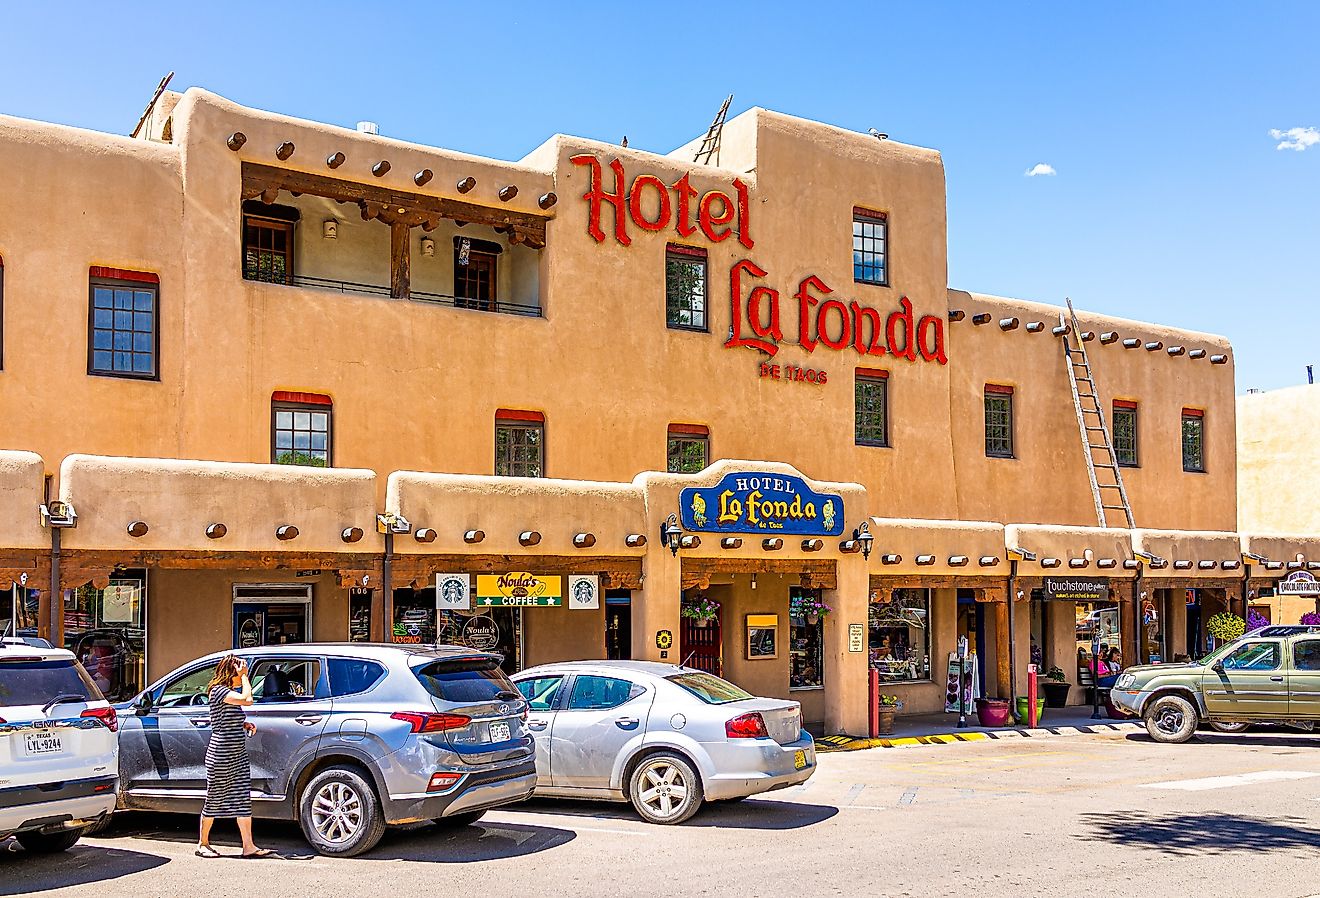 Downtown McCarthy's plaza square in famous town city village old town with sign exterior for Hotel La Fonda, Taos, New Mexico. Image credit Andriy Blokhin via Shutterstock